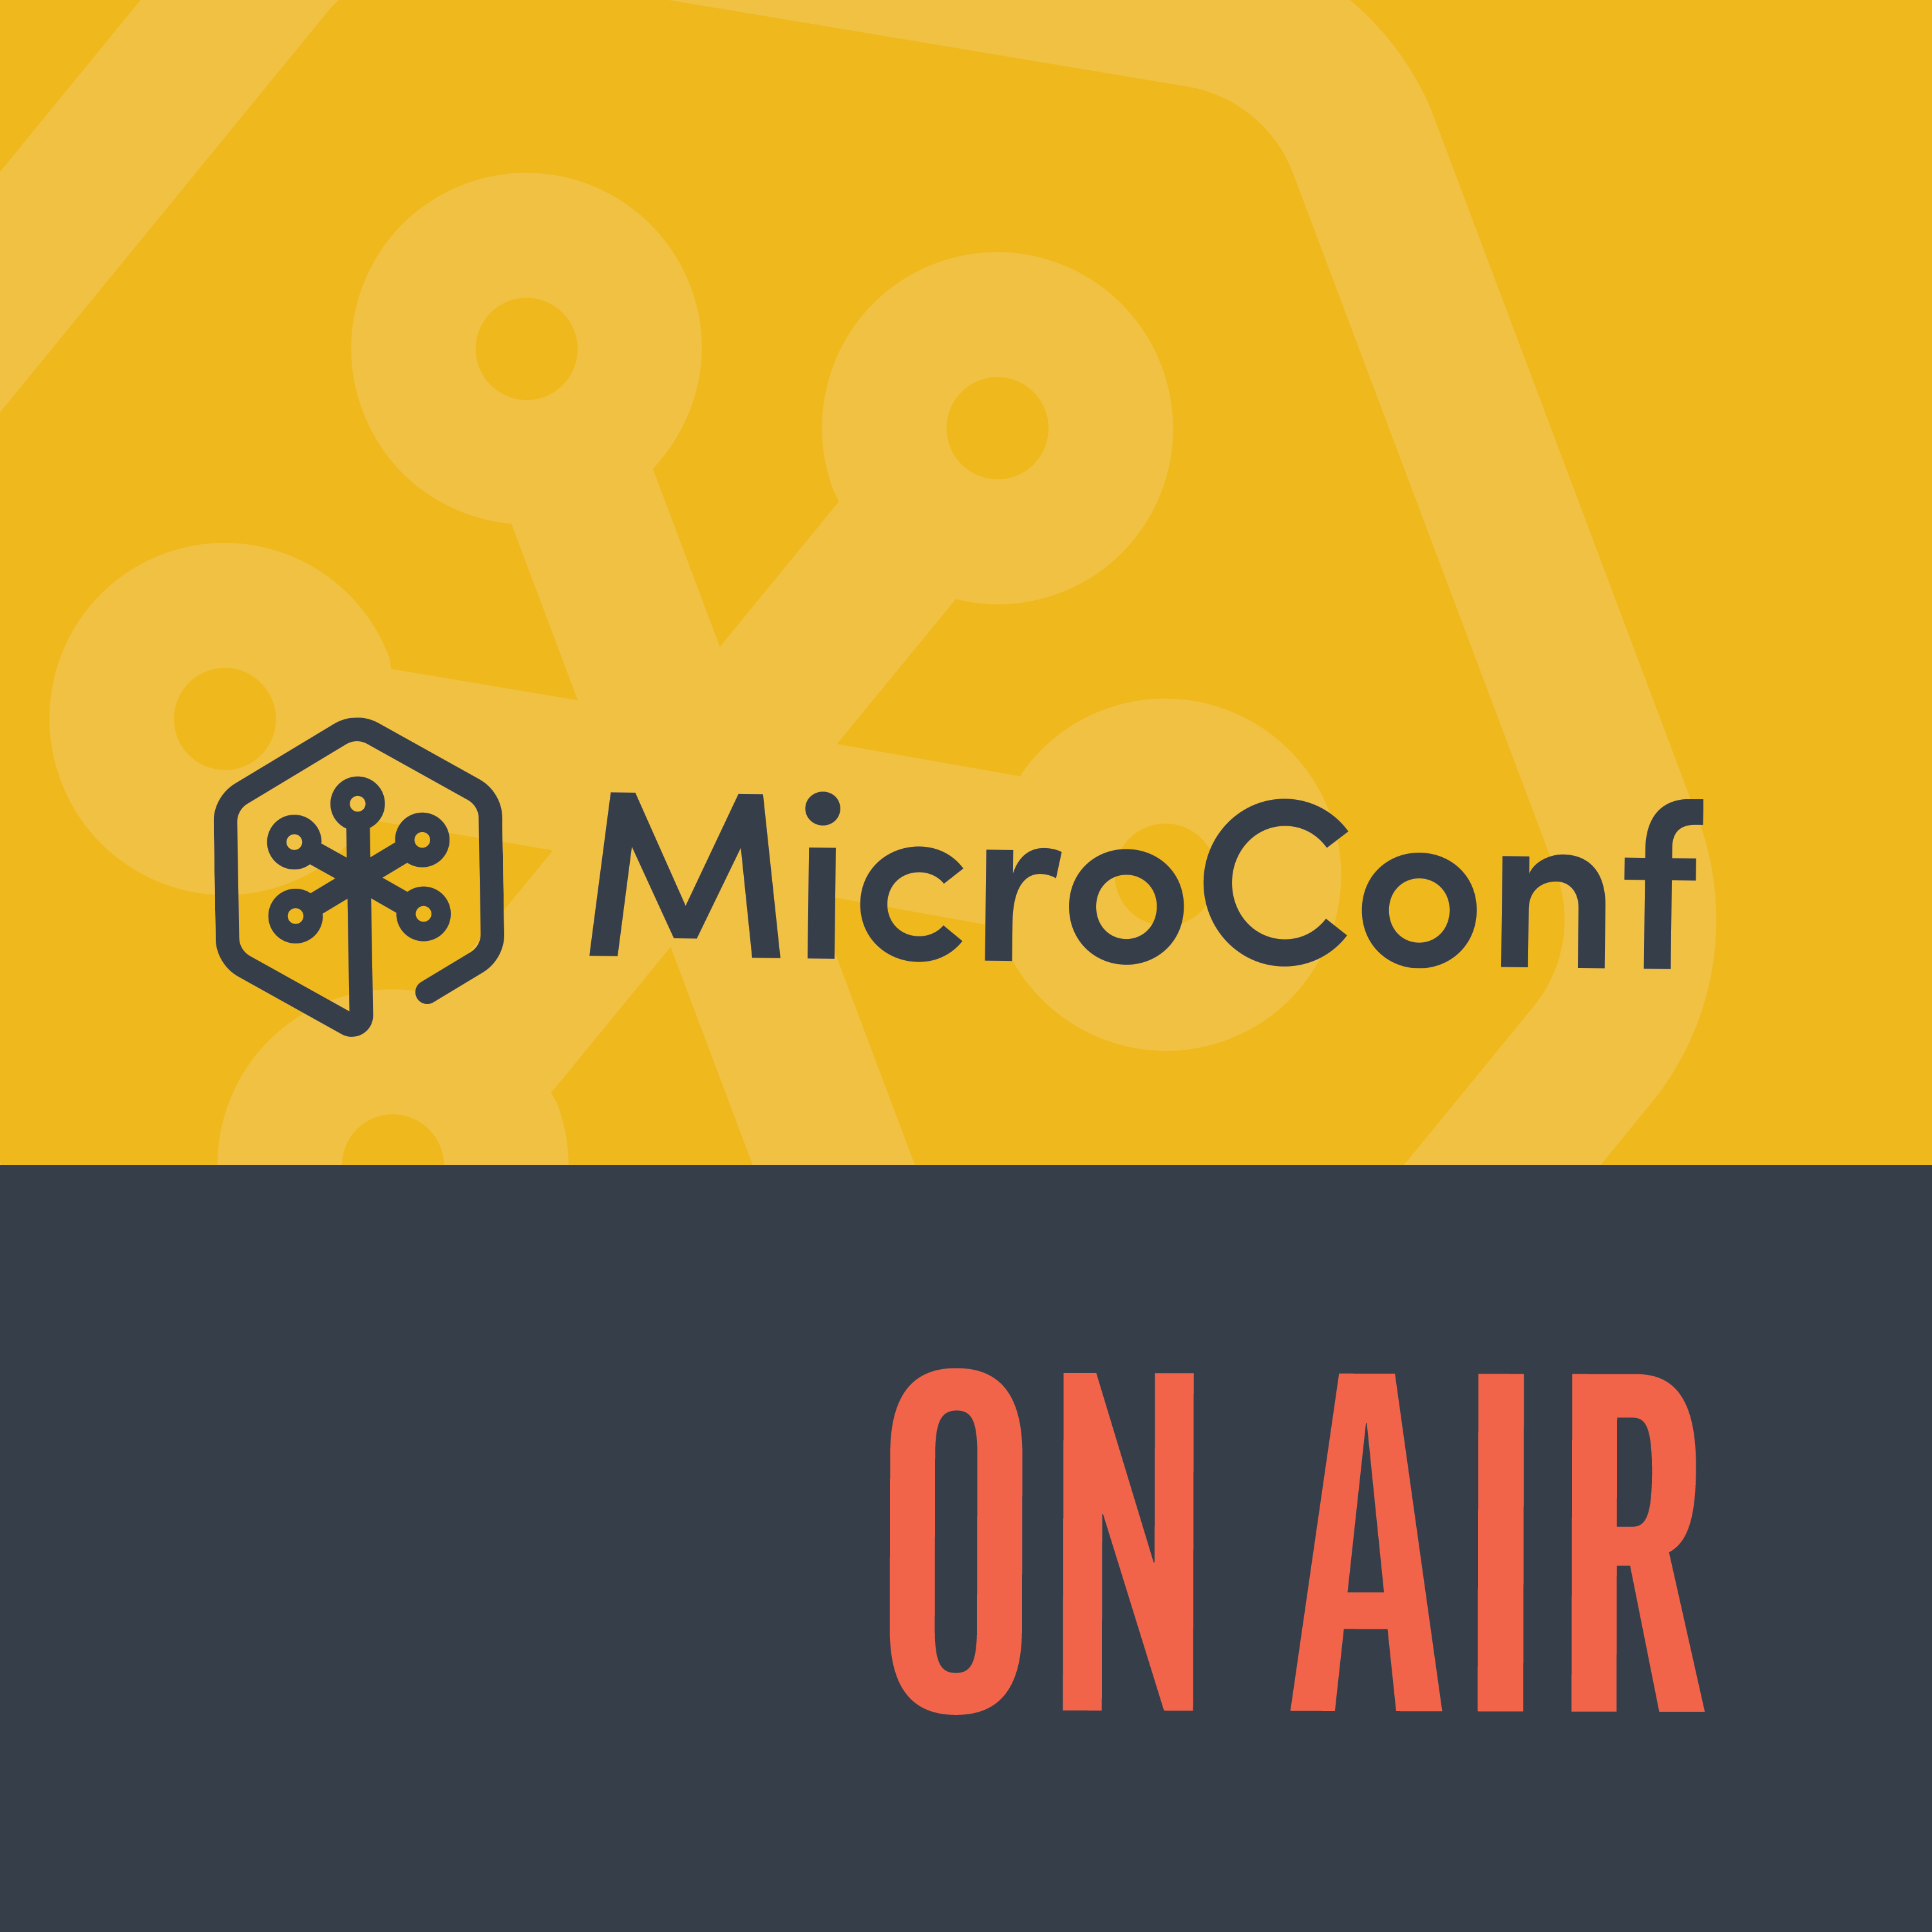 MicroConf Refresh Episode 46: The SaaS Founder Guide to No Code